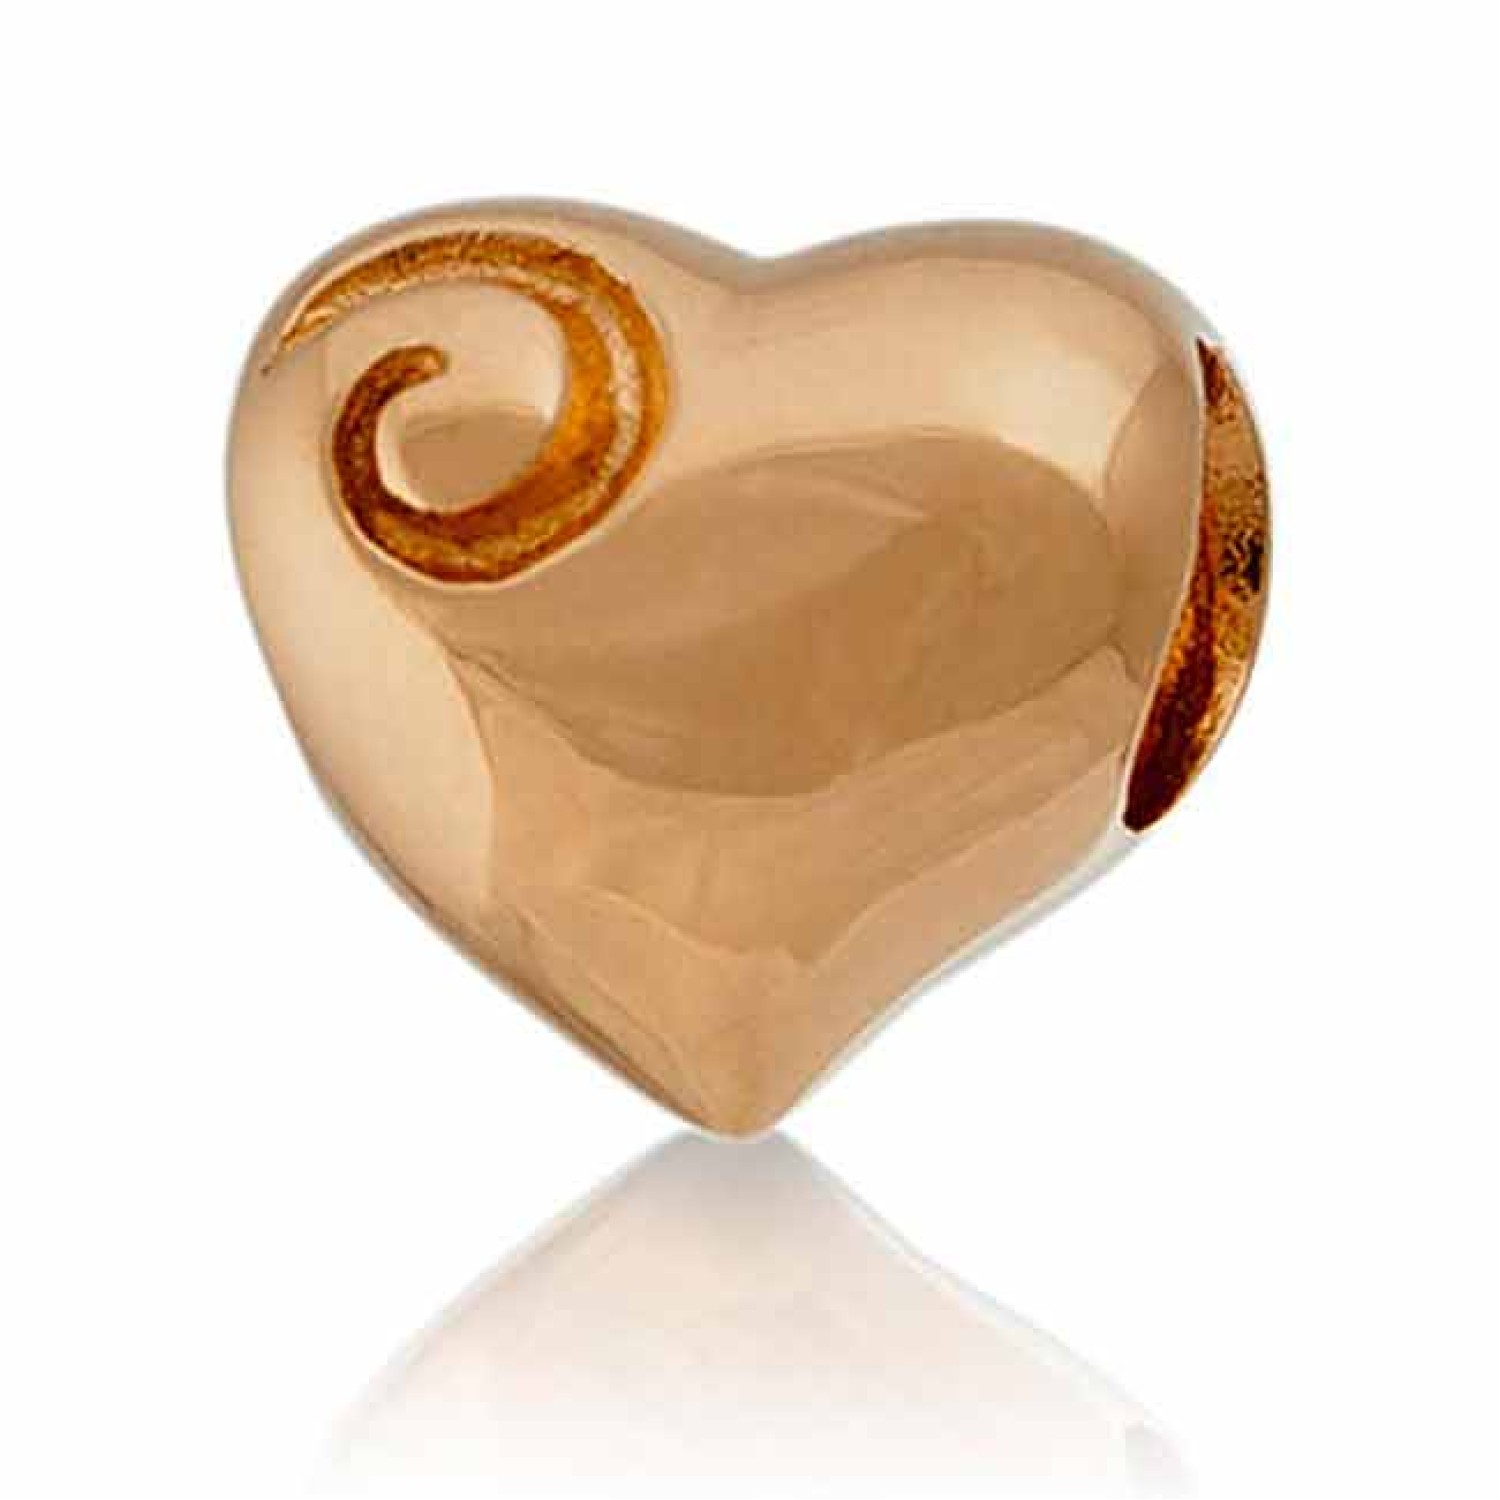 110G Evolve 9ct Gold Aotearoa Heart. Aotearoas Heart symbolises compassion, strength, hope and unconditional love. The simple koru engraved deep into the heart connects us with new beginnings and growth, inspiring us to move forward. This special charm @c